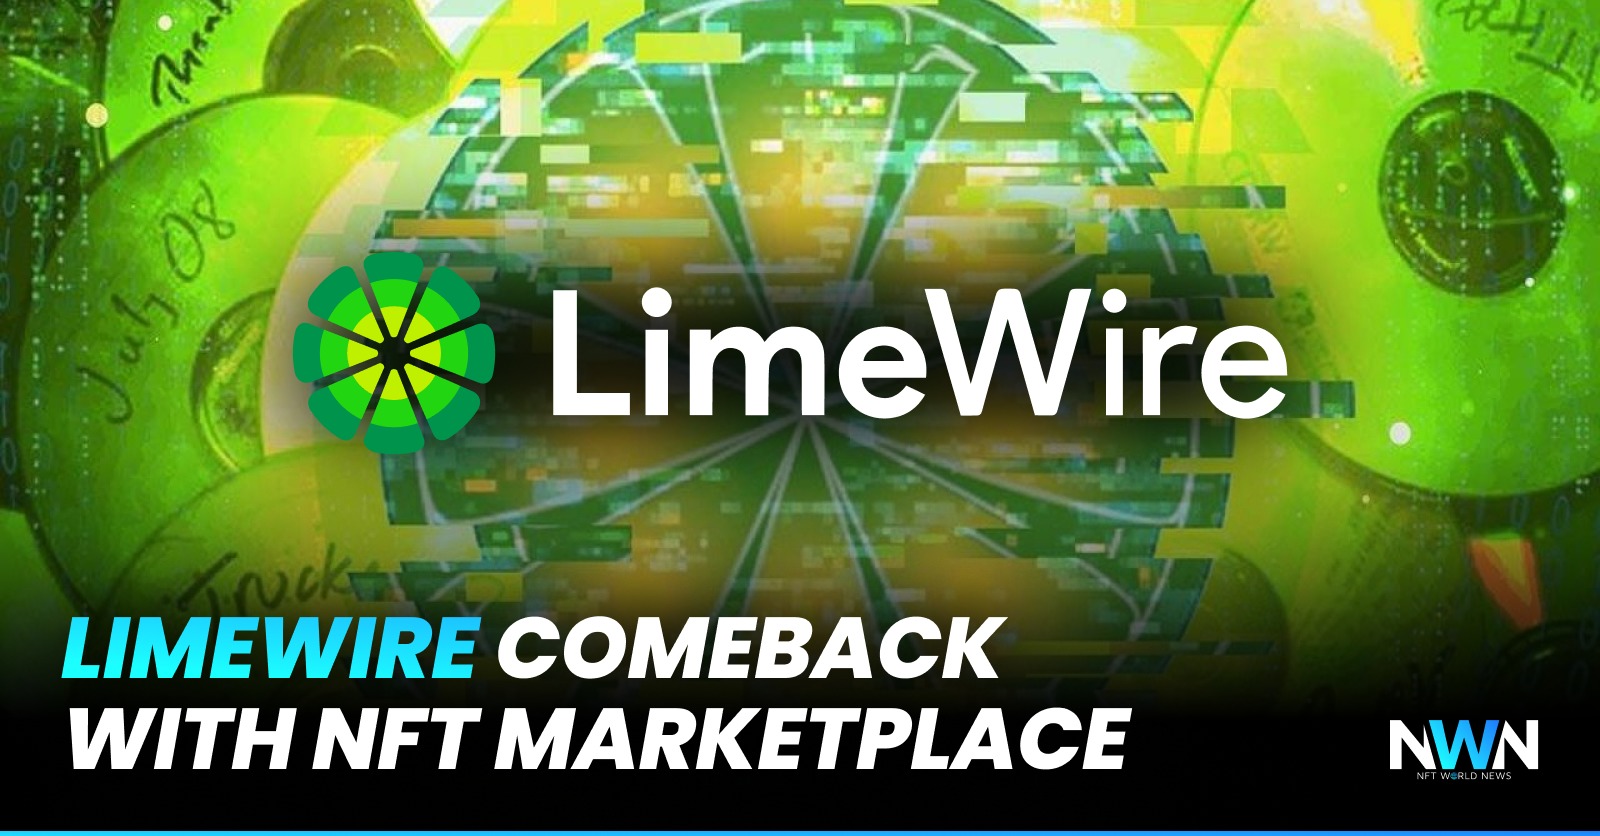 LimeWire Is Coming Back With New NFT Marketplace